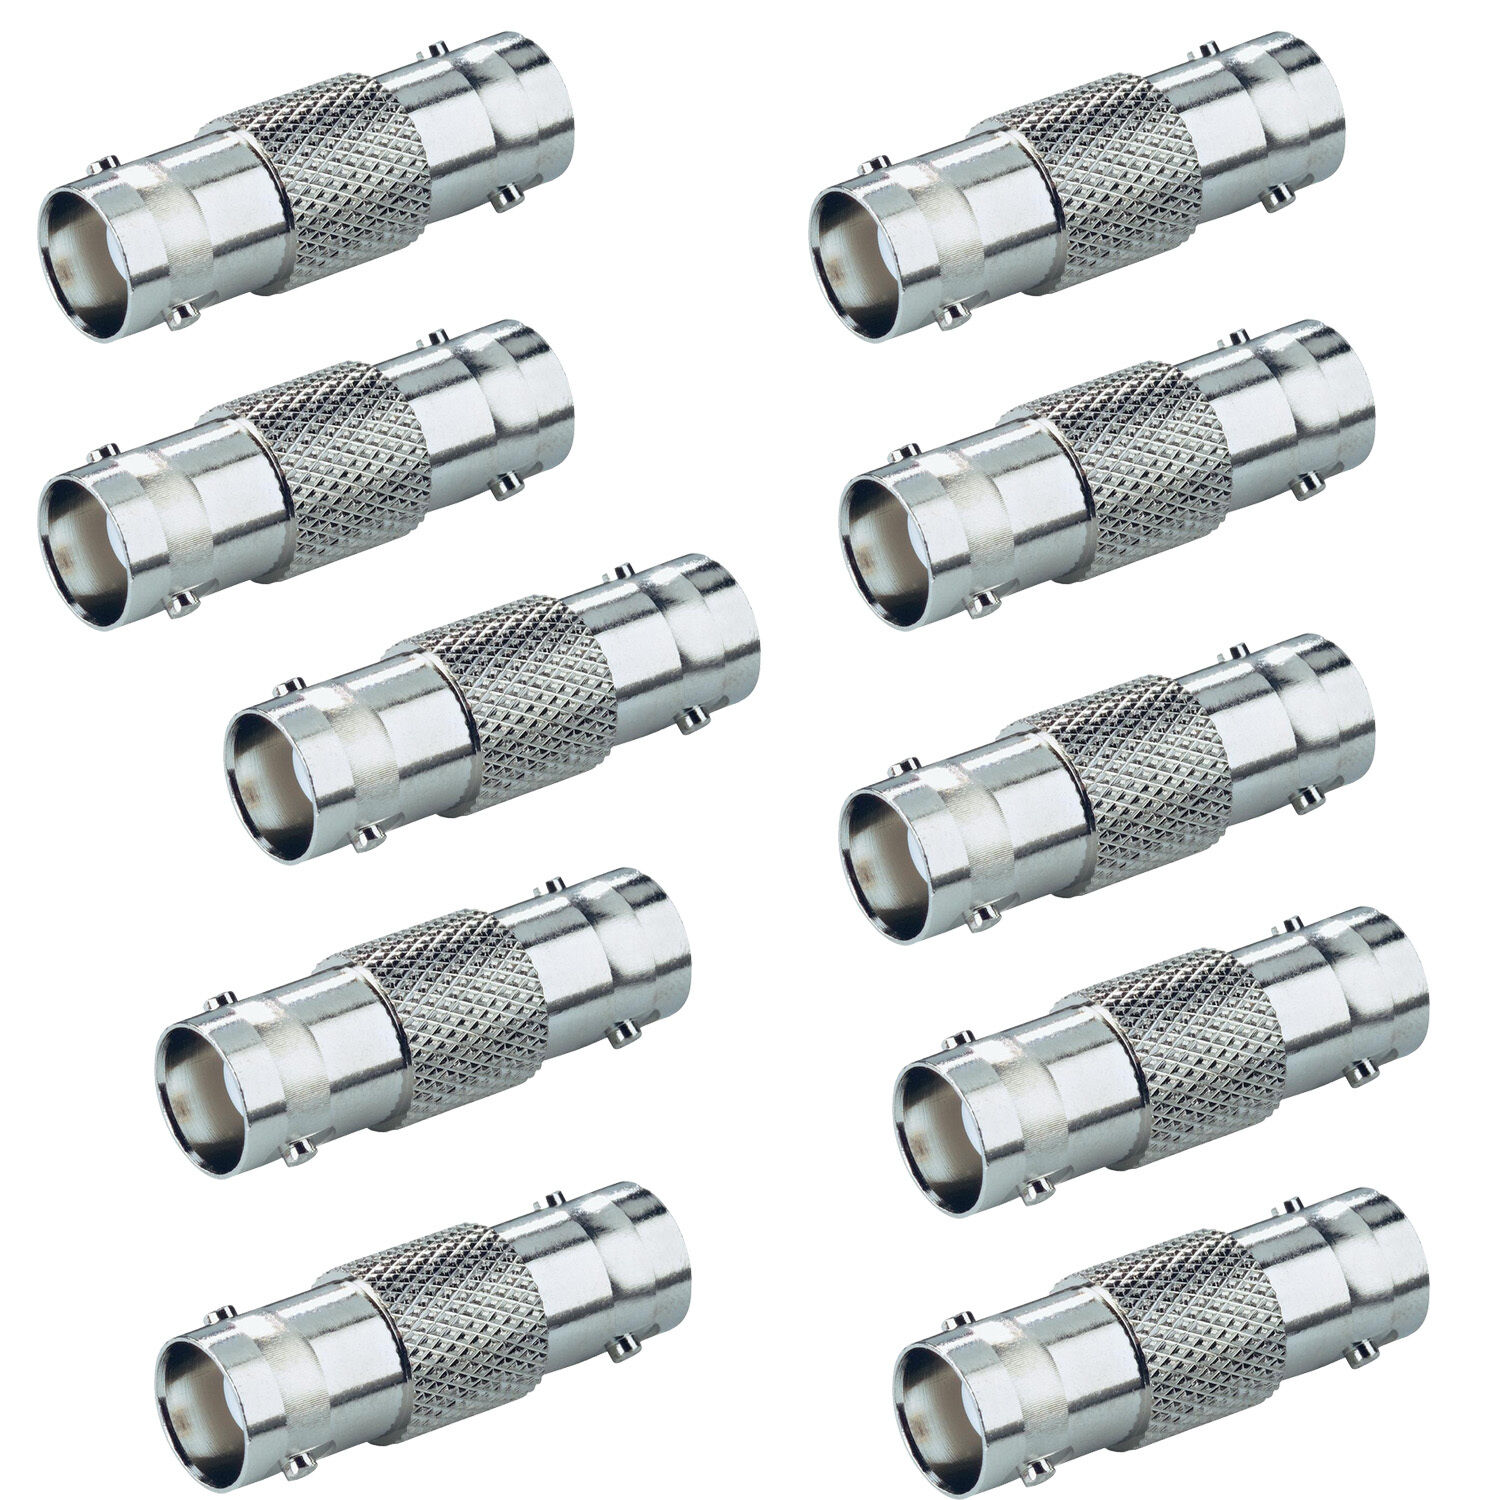 10PCS BNC Female To BNC Female Connector couplers Adapter For CCTV Video Camera